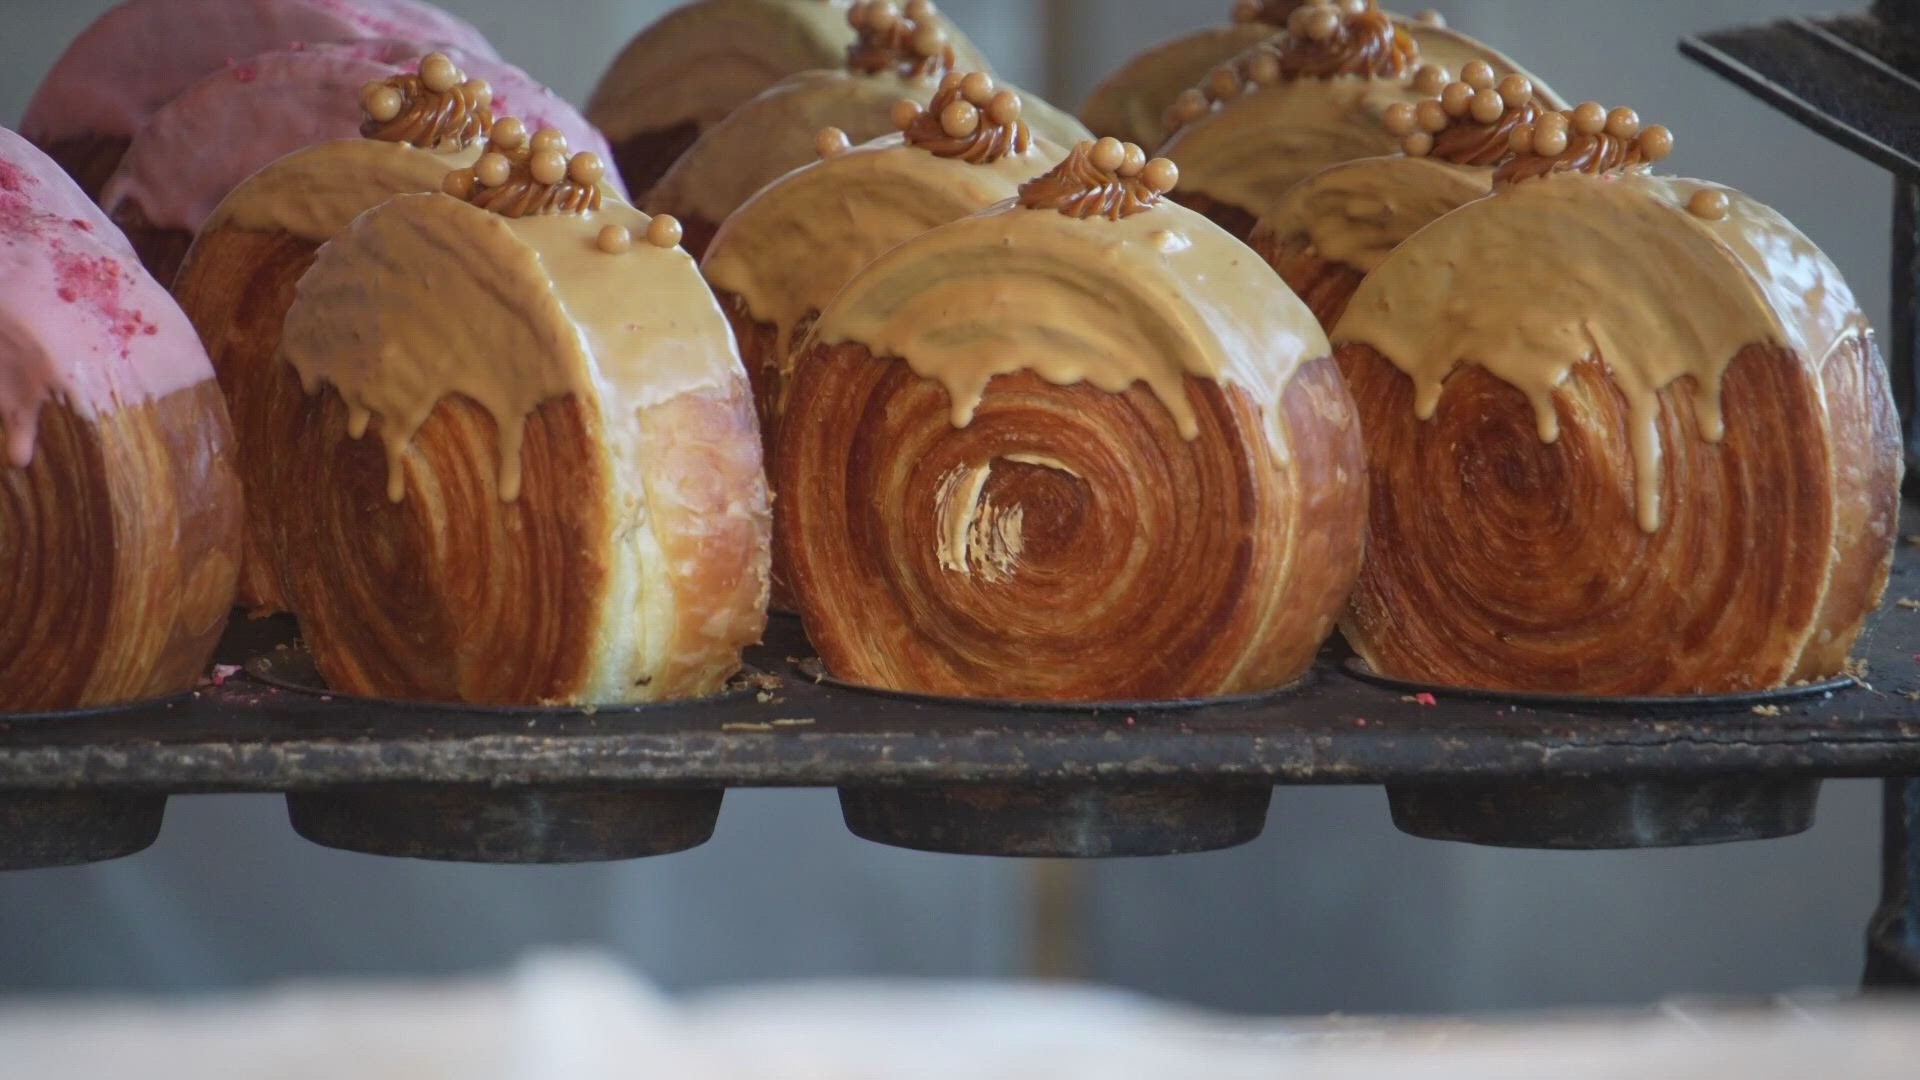 Izzio Bakery in RiNo offers creative croissants that have gone viral on social media recently.